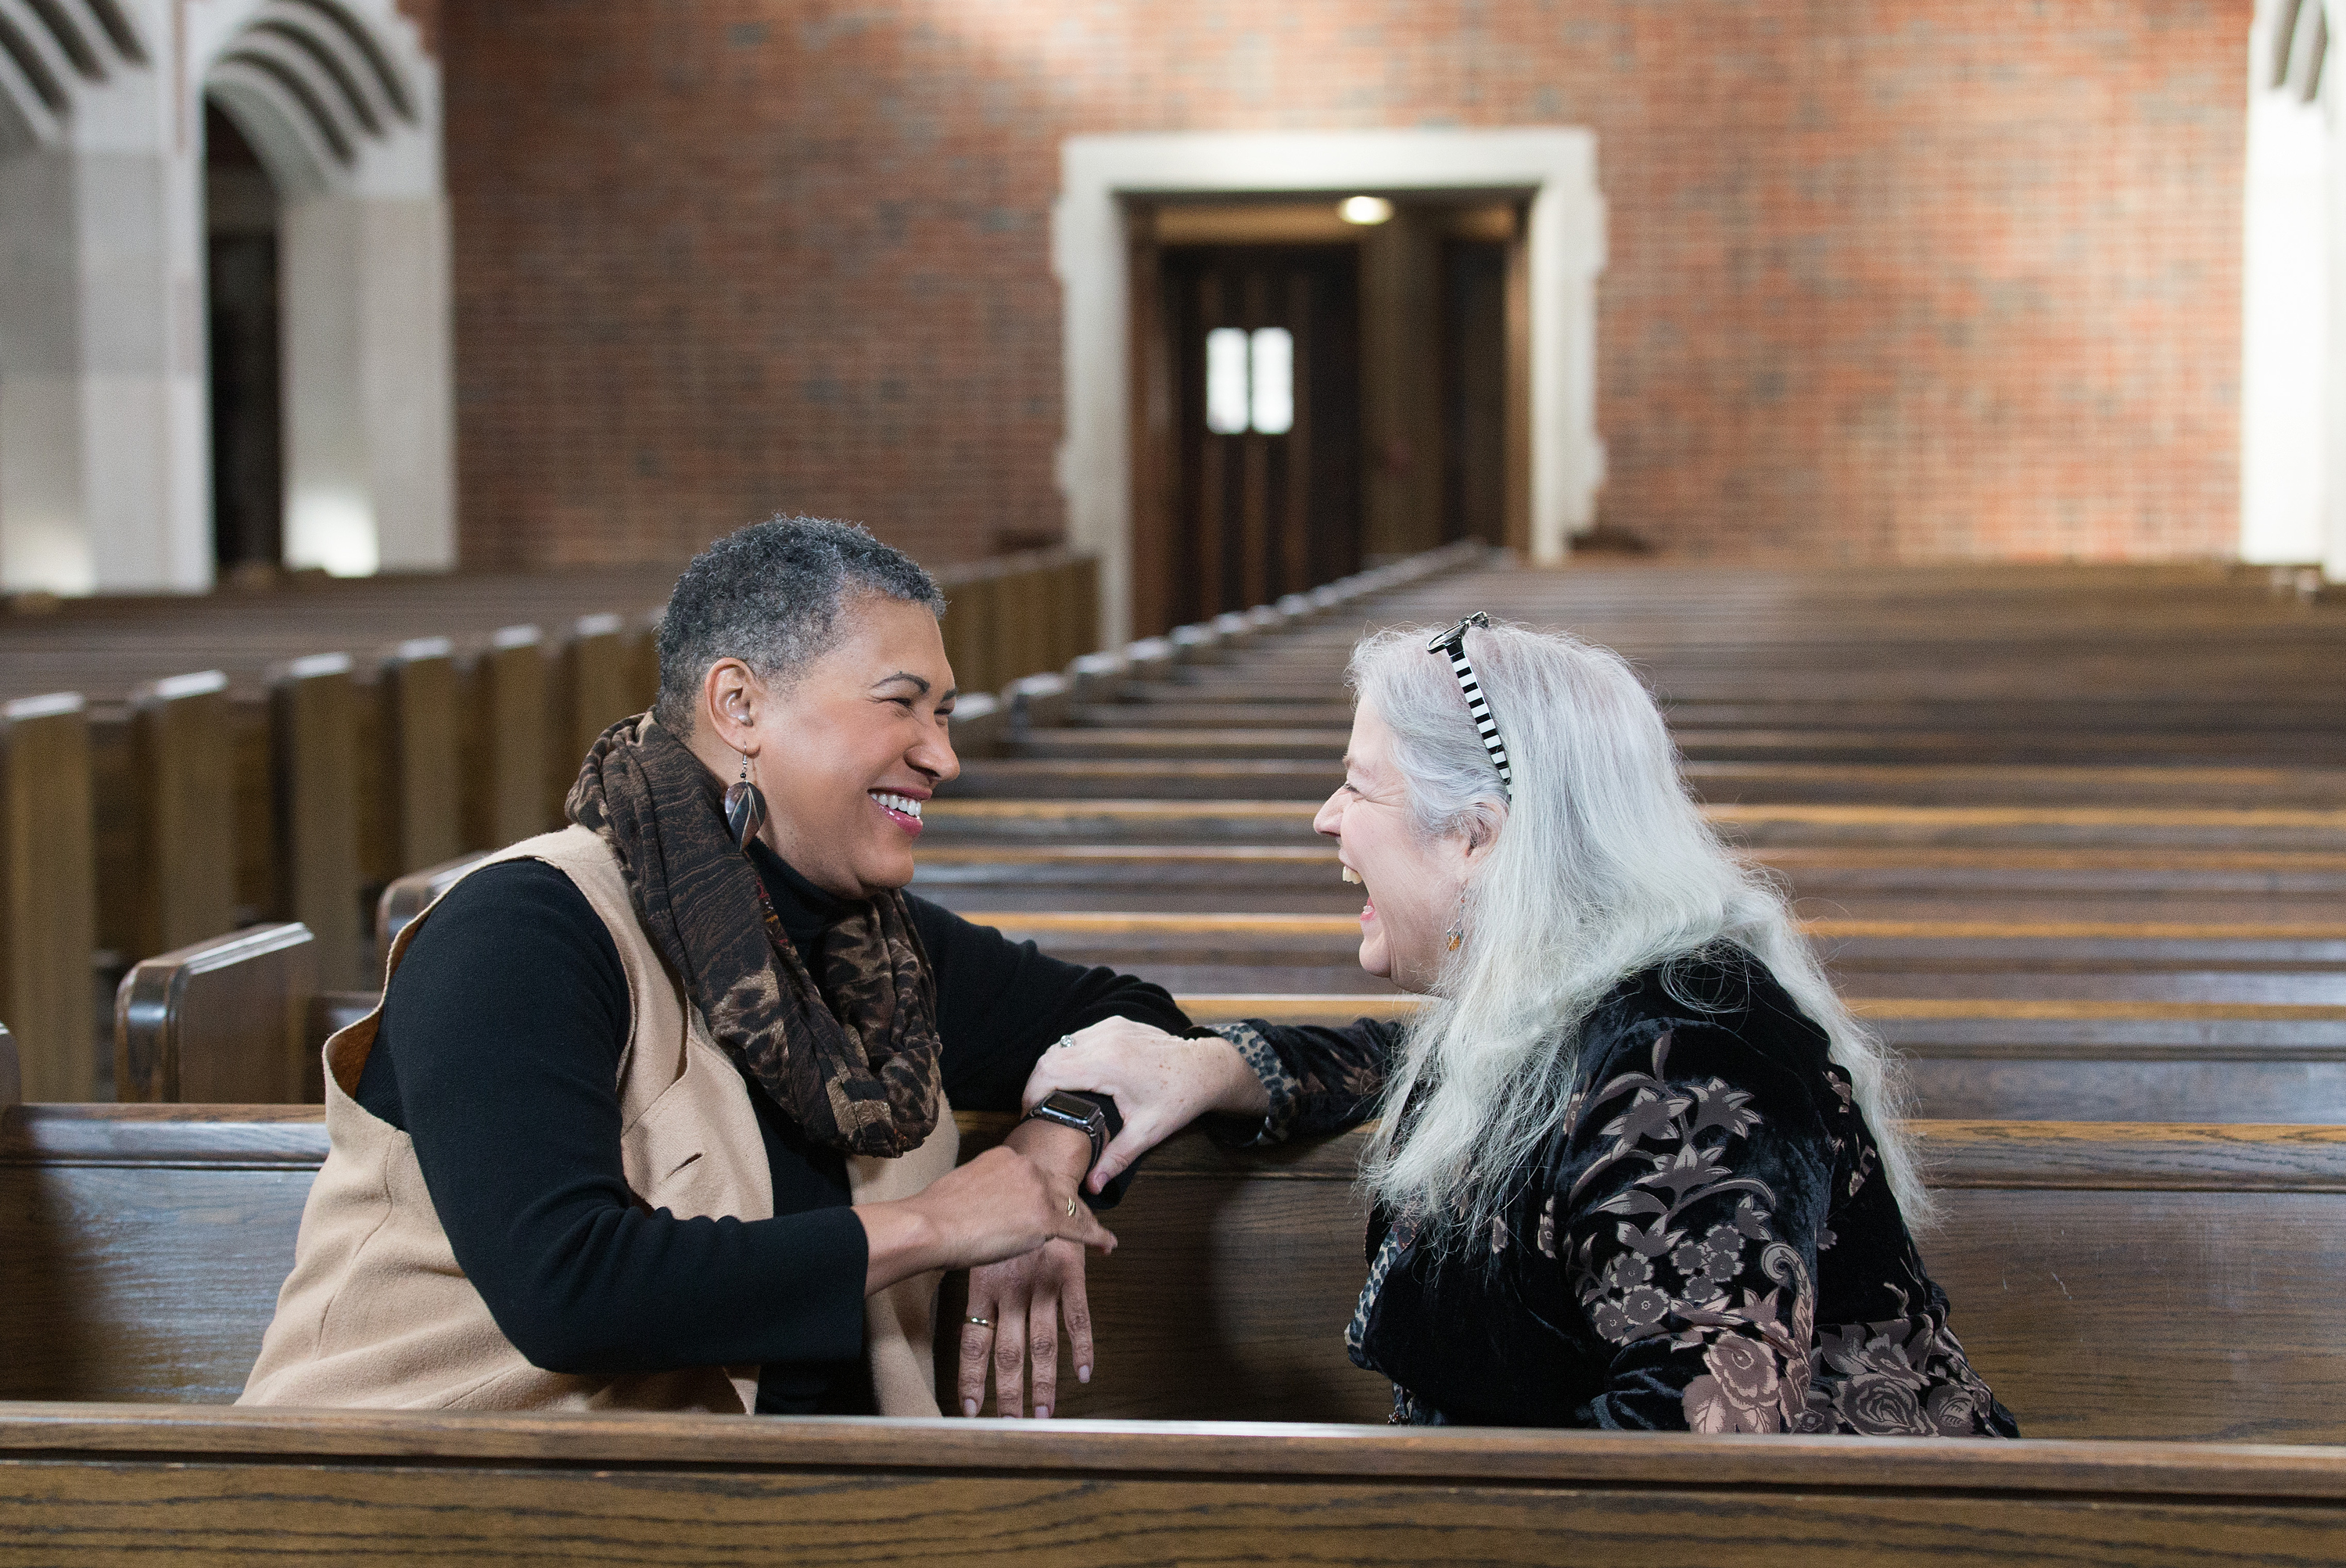 The Rev. Joy J. Moore (left) and Bonnie Wheeler talk about values, laws, marriage and the Bible as part of a new video series from the United Methodist Commission on Religion and Race. Photo by Mike DuBose, UMNS.